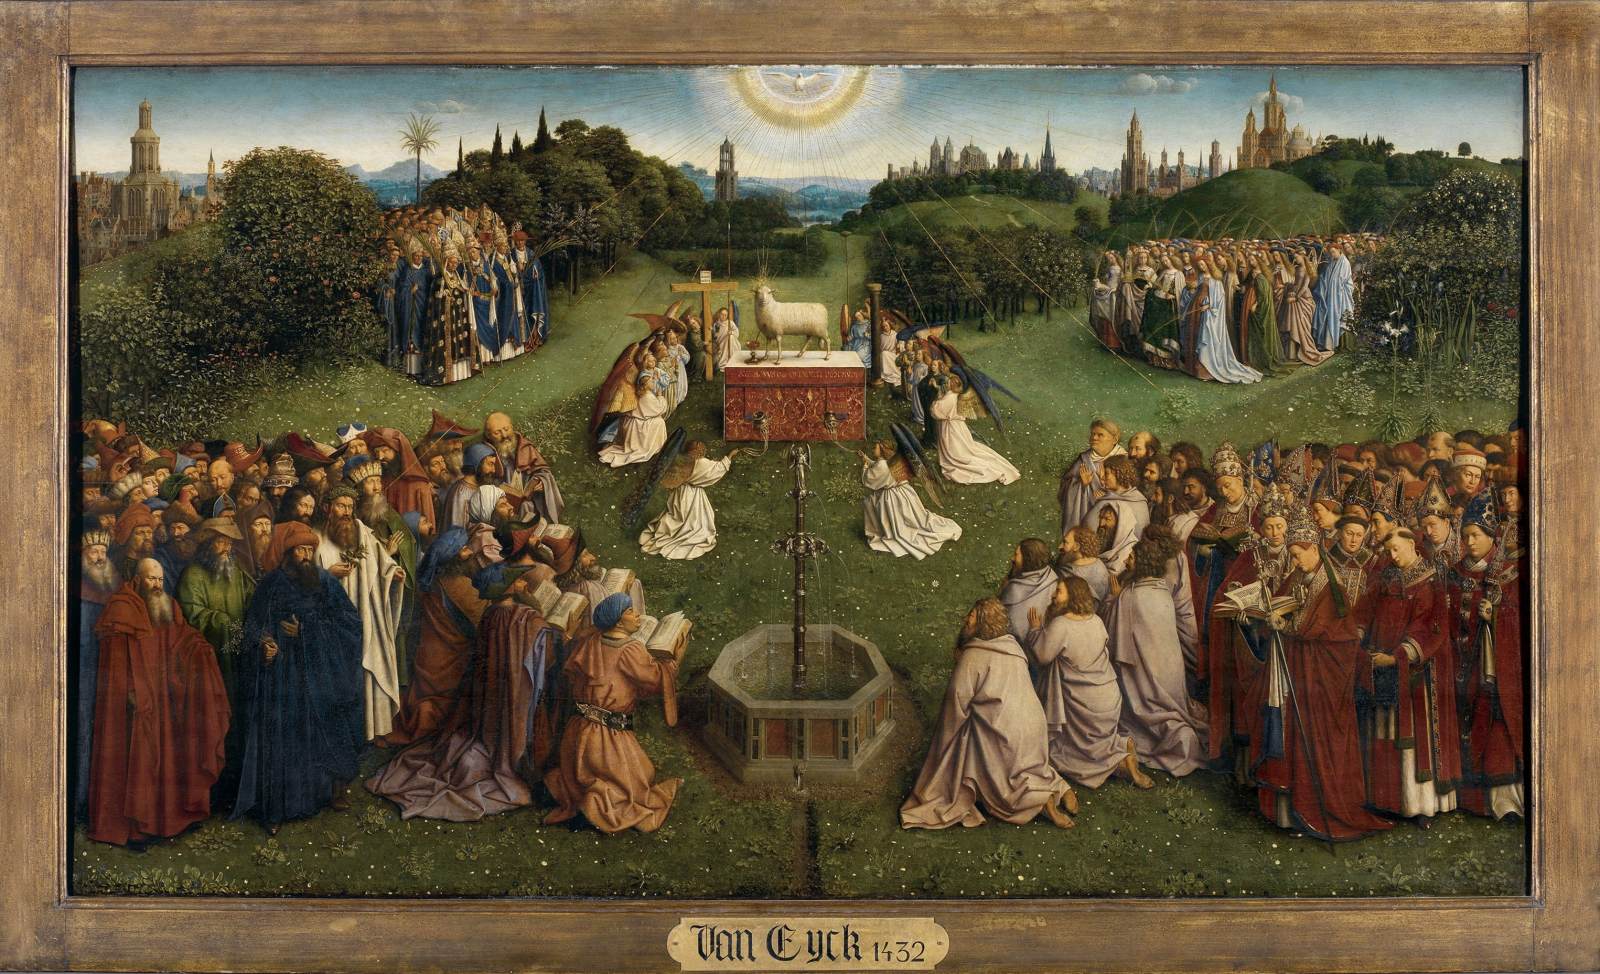 The Ghent Altarpiece: Adoration of the Lamb